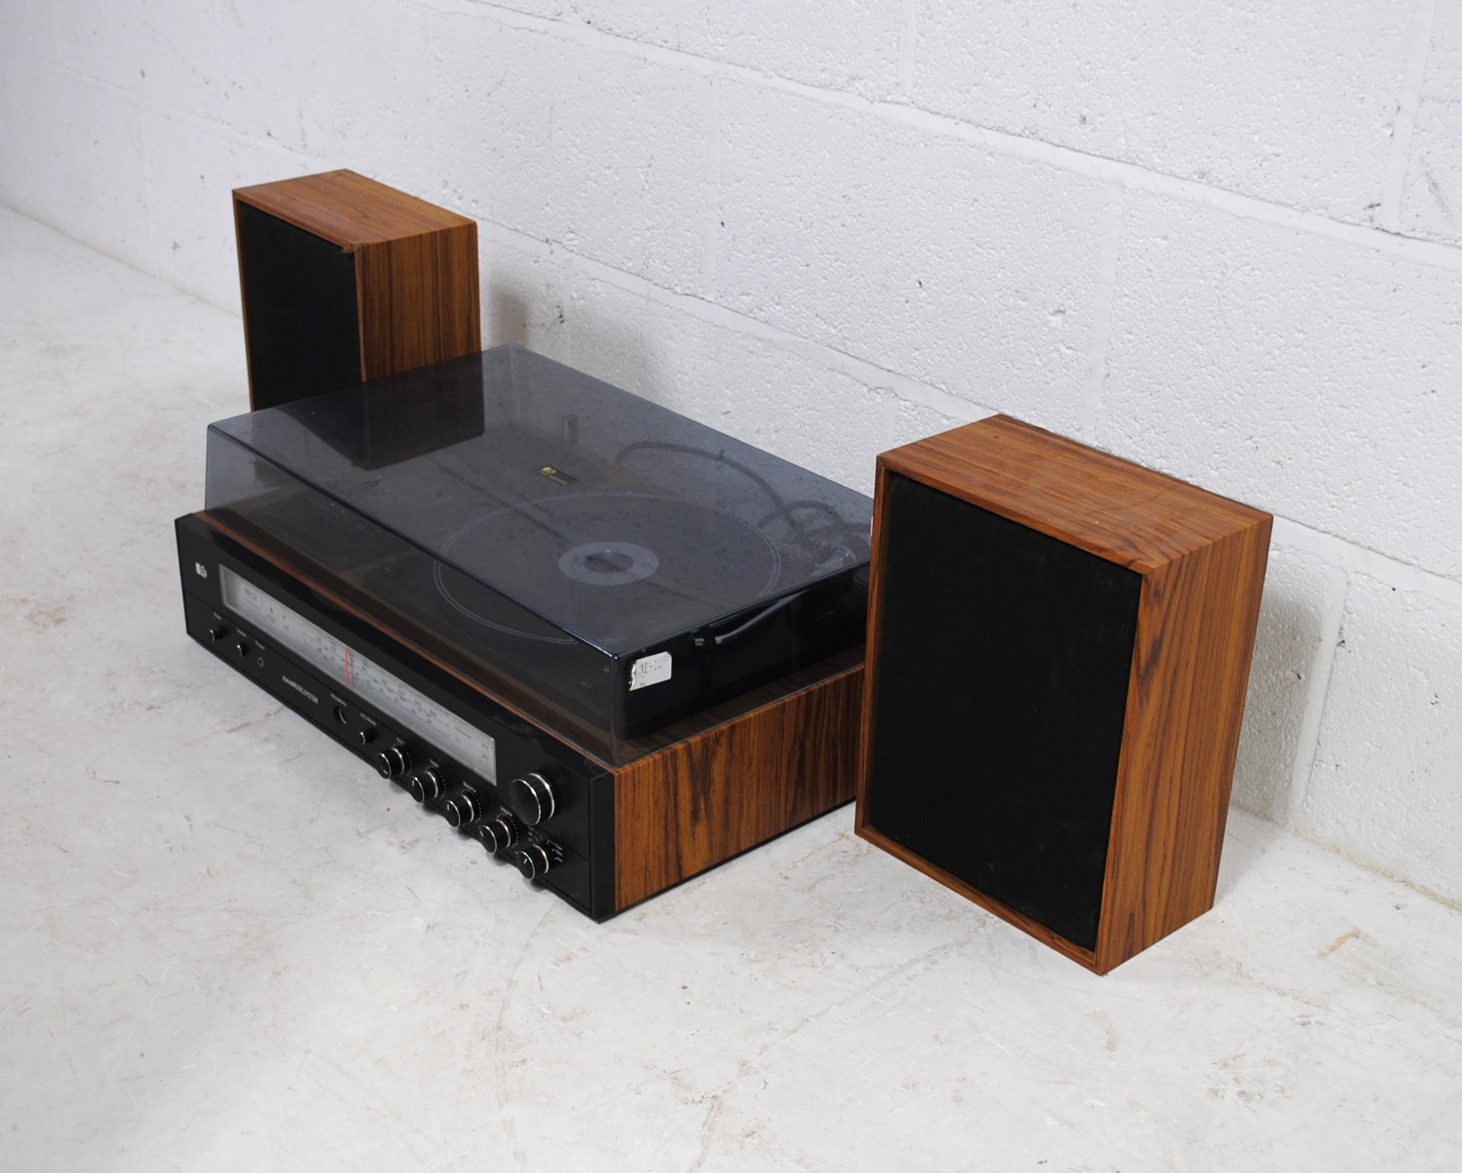 A vintage Pye 1612 stereo music system, including a pair of Pye 5780 8ohm bookshelf speakers - Image 3 of 11